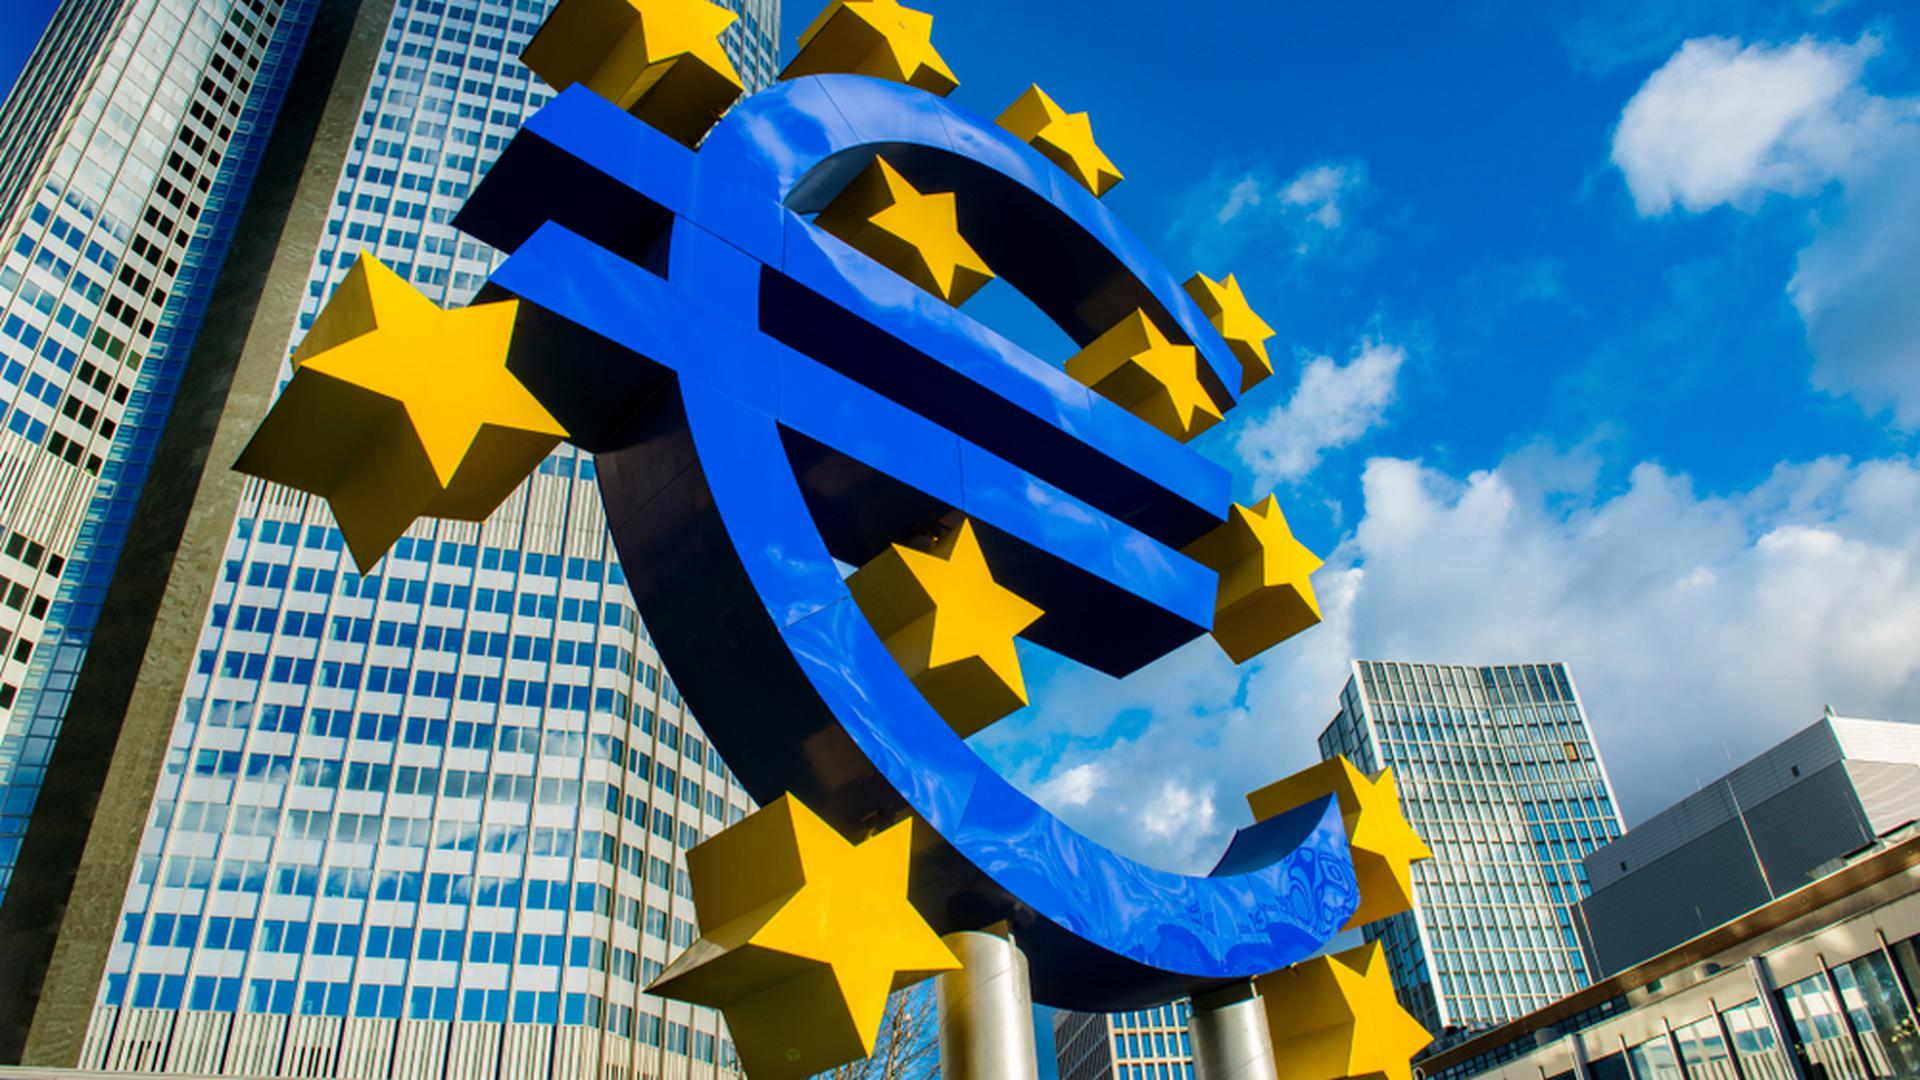 The European Central Bank said inflation rose to almost 5% in November